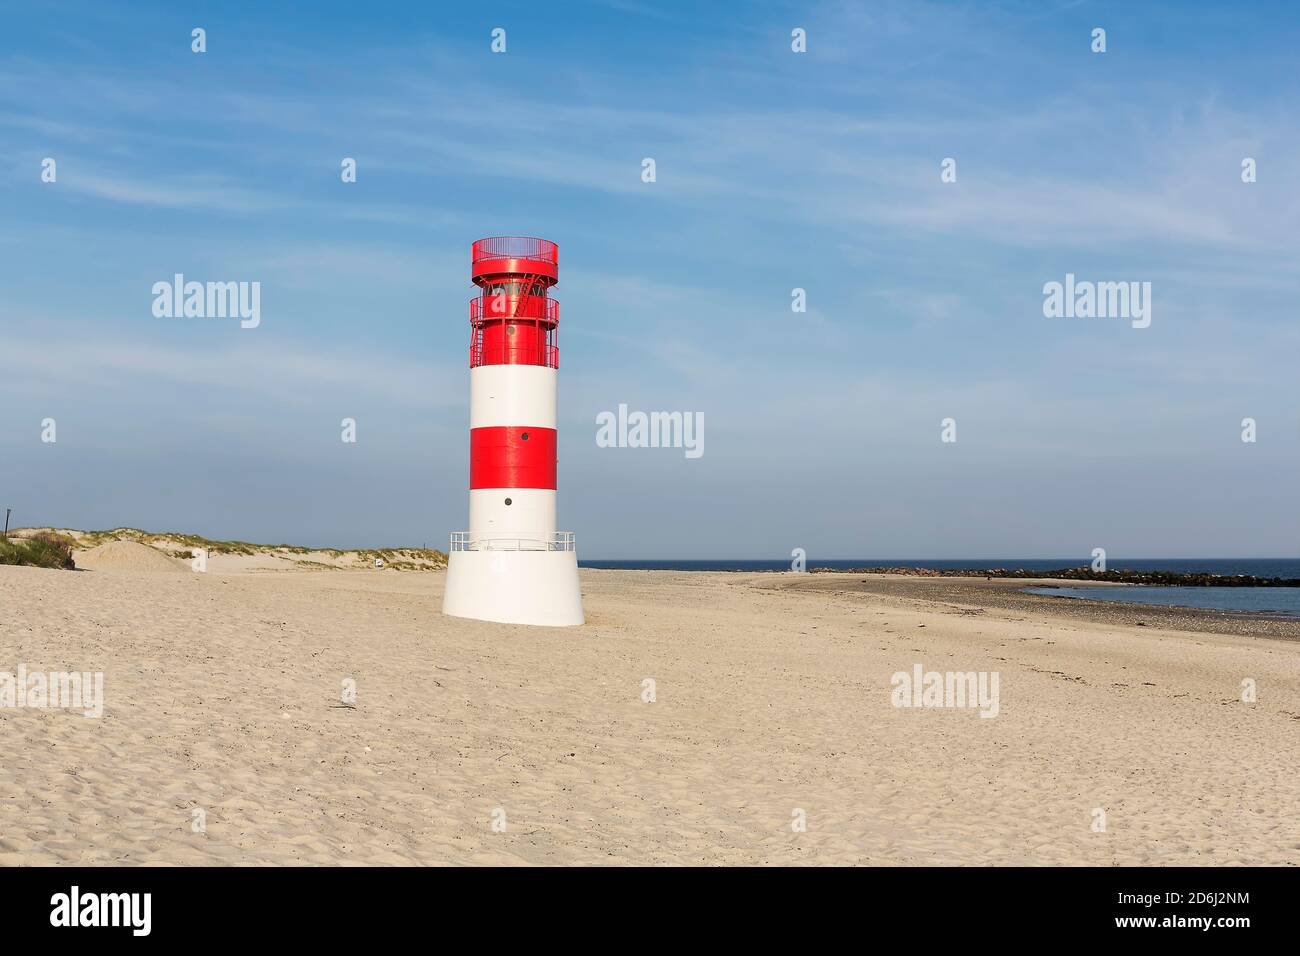 Red-white lighthouse Helgoland Dune on the south beach, Helgoland Dune, Helgoland Island, North Sea, Schleswig-Holstein, Germany Stock Photo